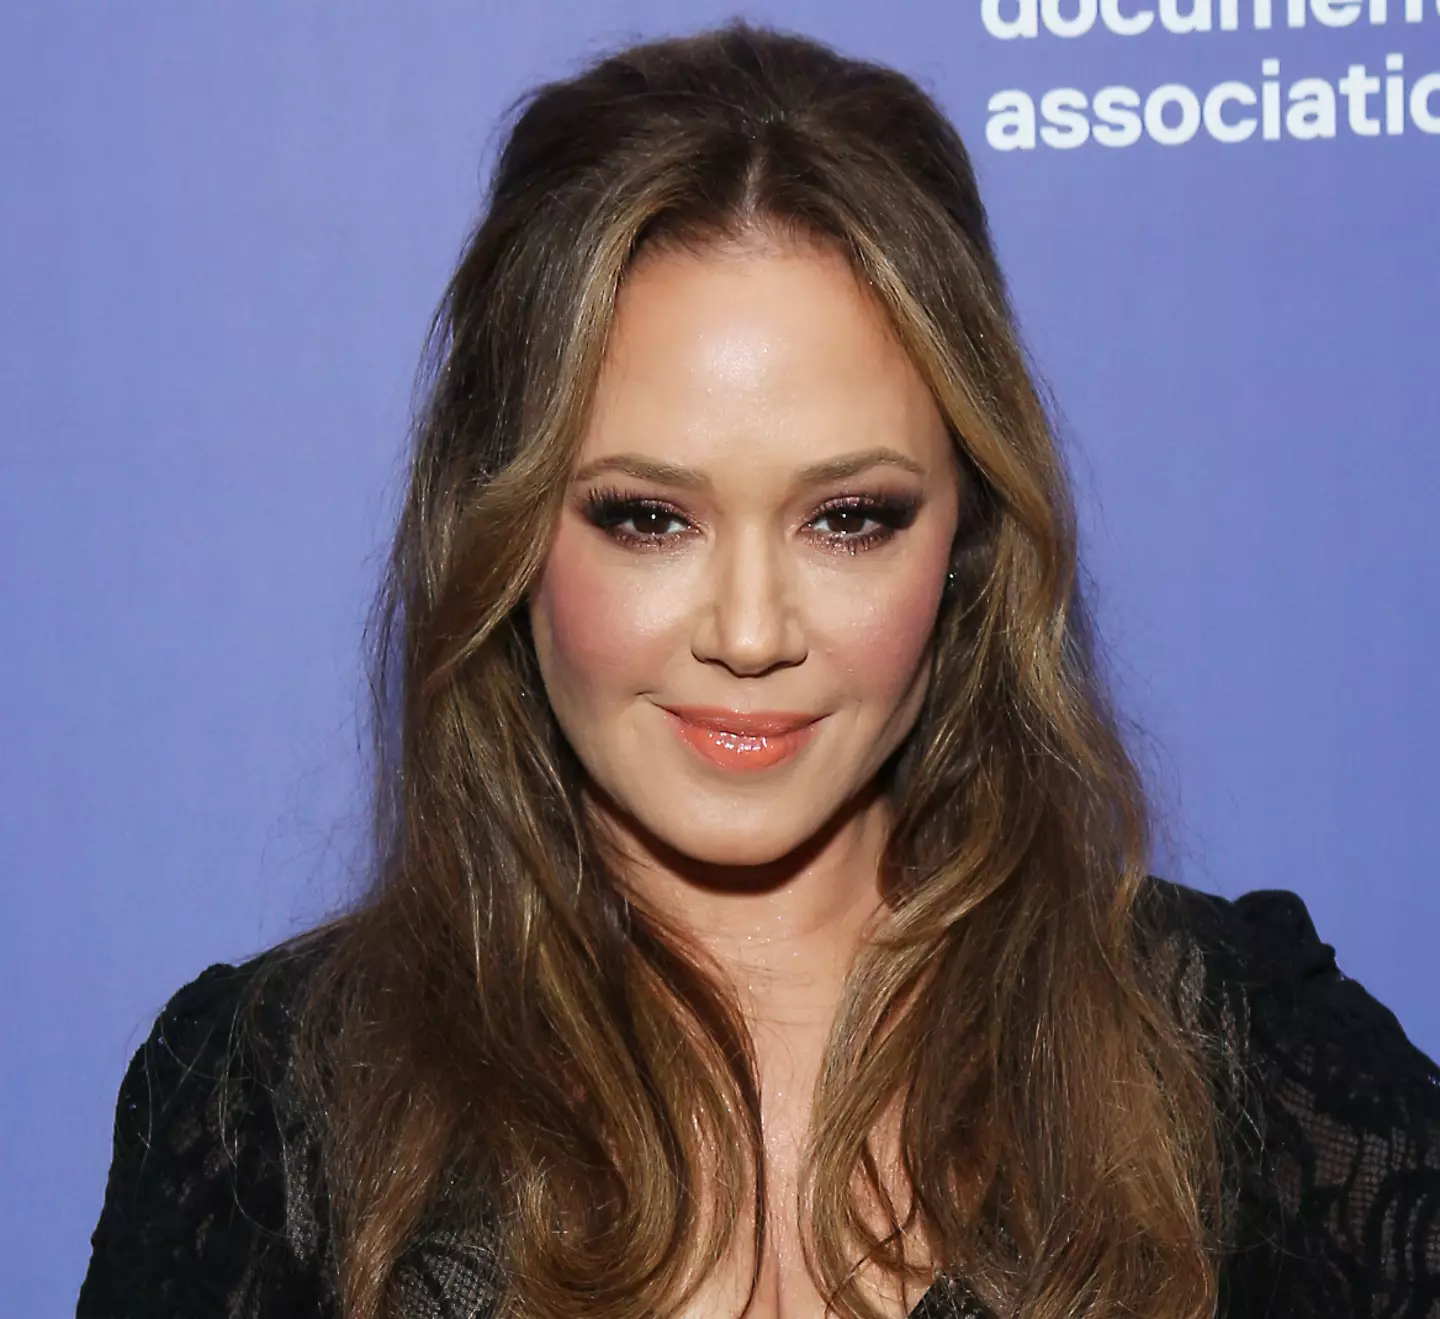 Leah Remini claimed the Church turned her dad against her.